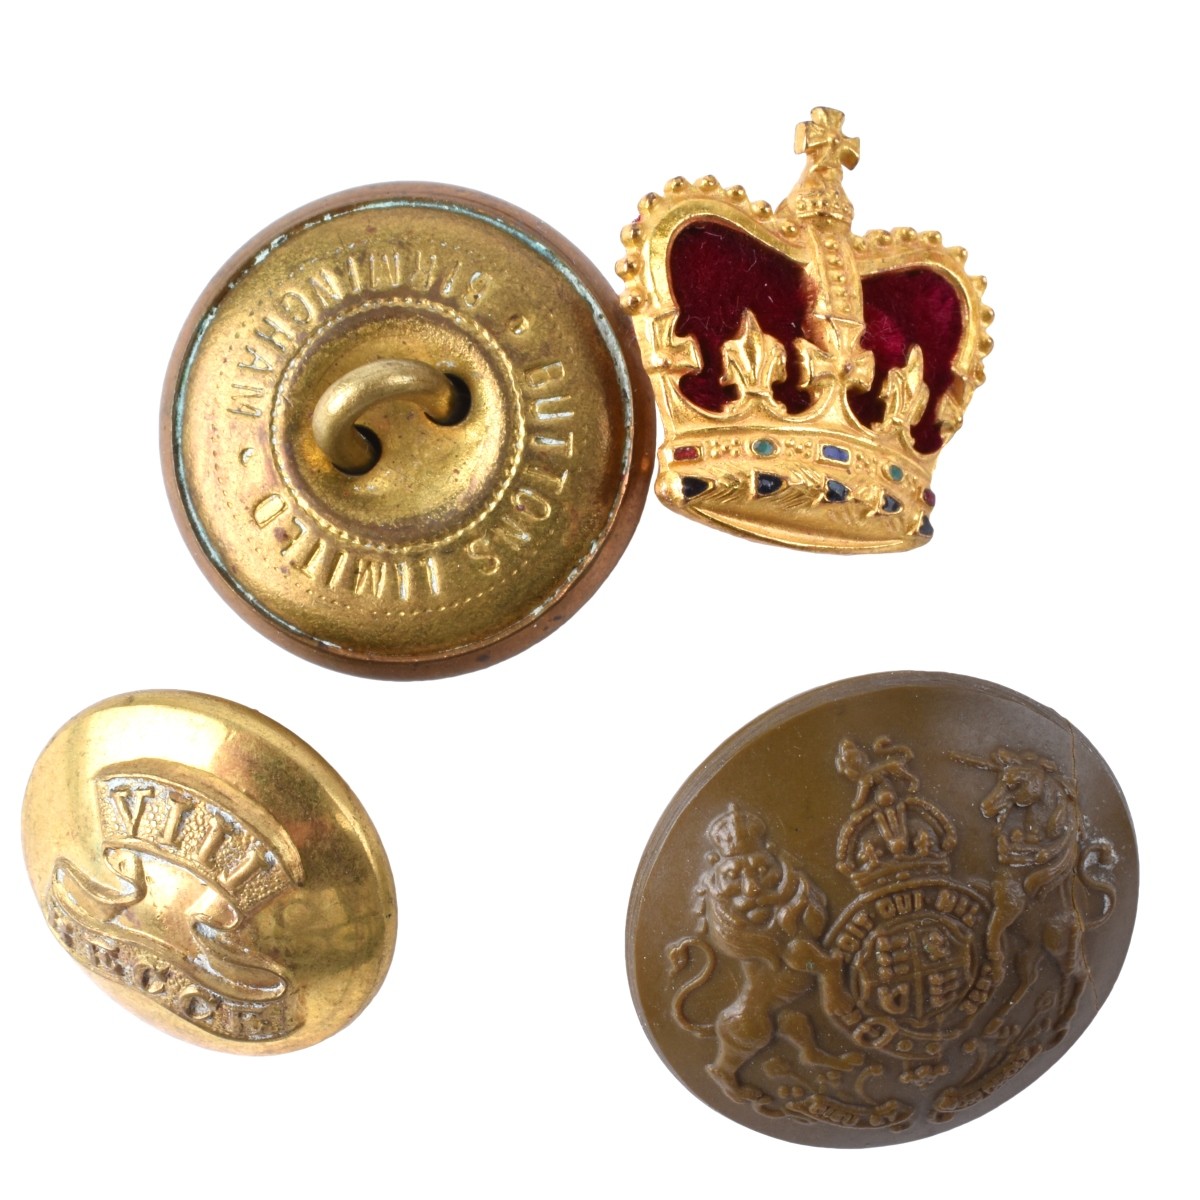 Old Military Buttons